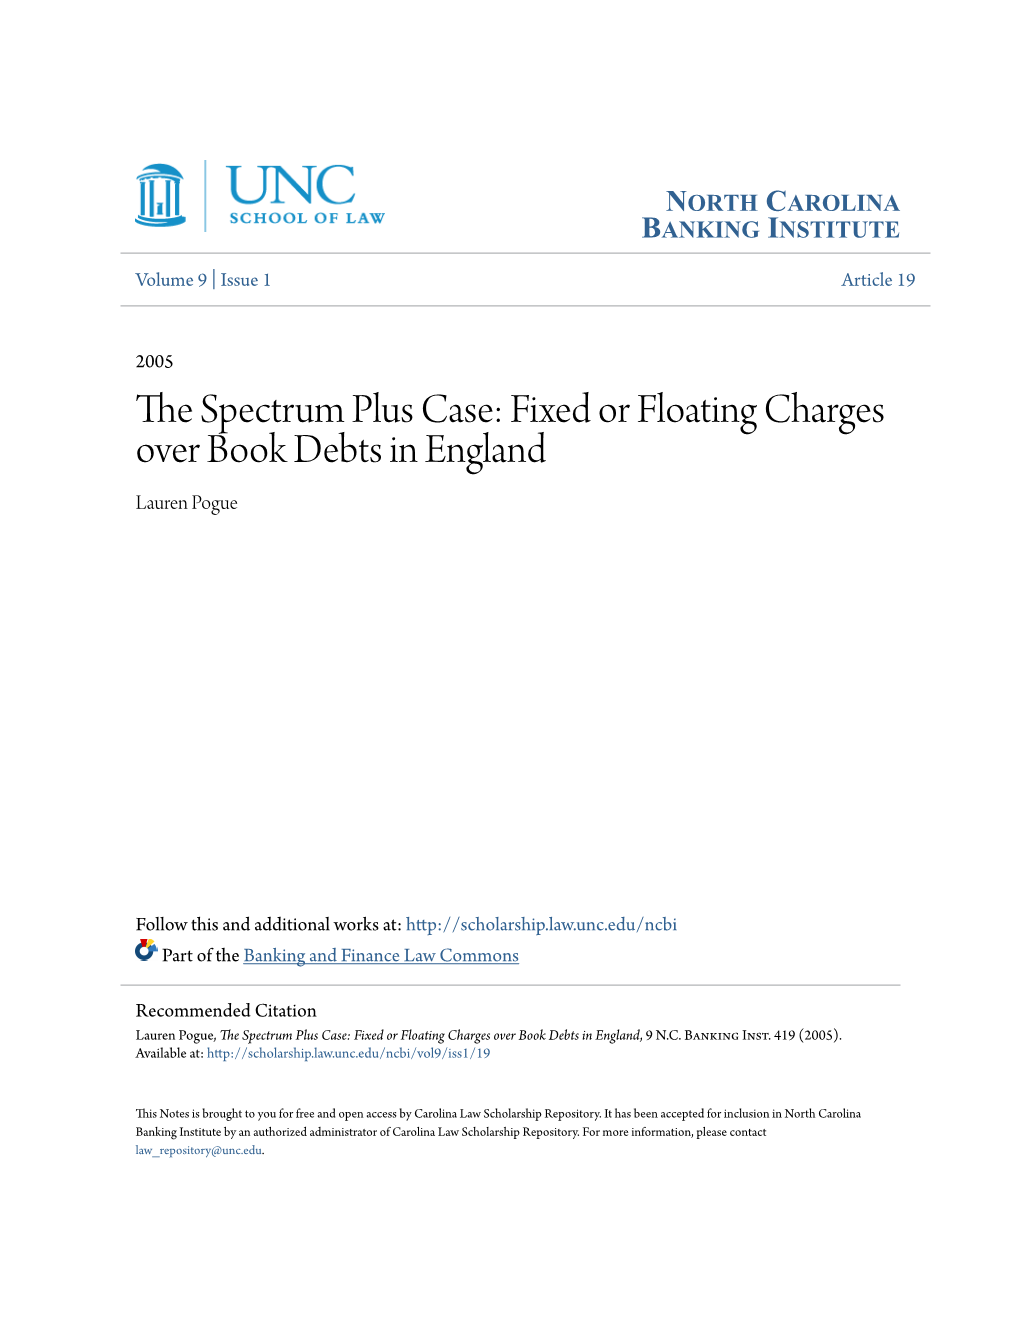 The Spectrum Plus Case: Fixed Or Floating Charges Over Book Debts in England, 9 N.C